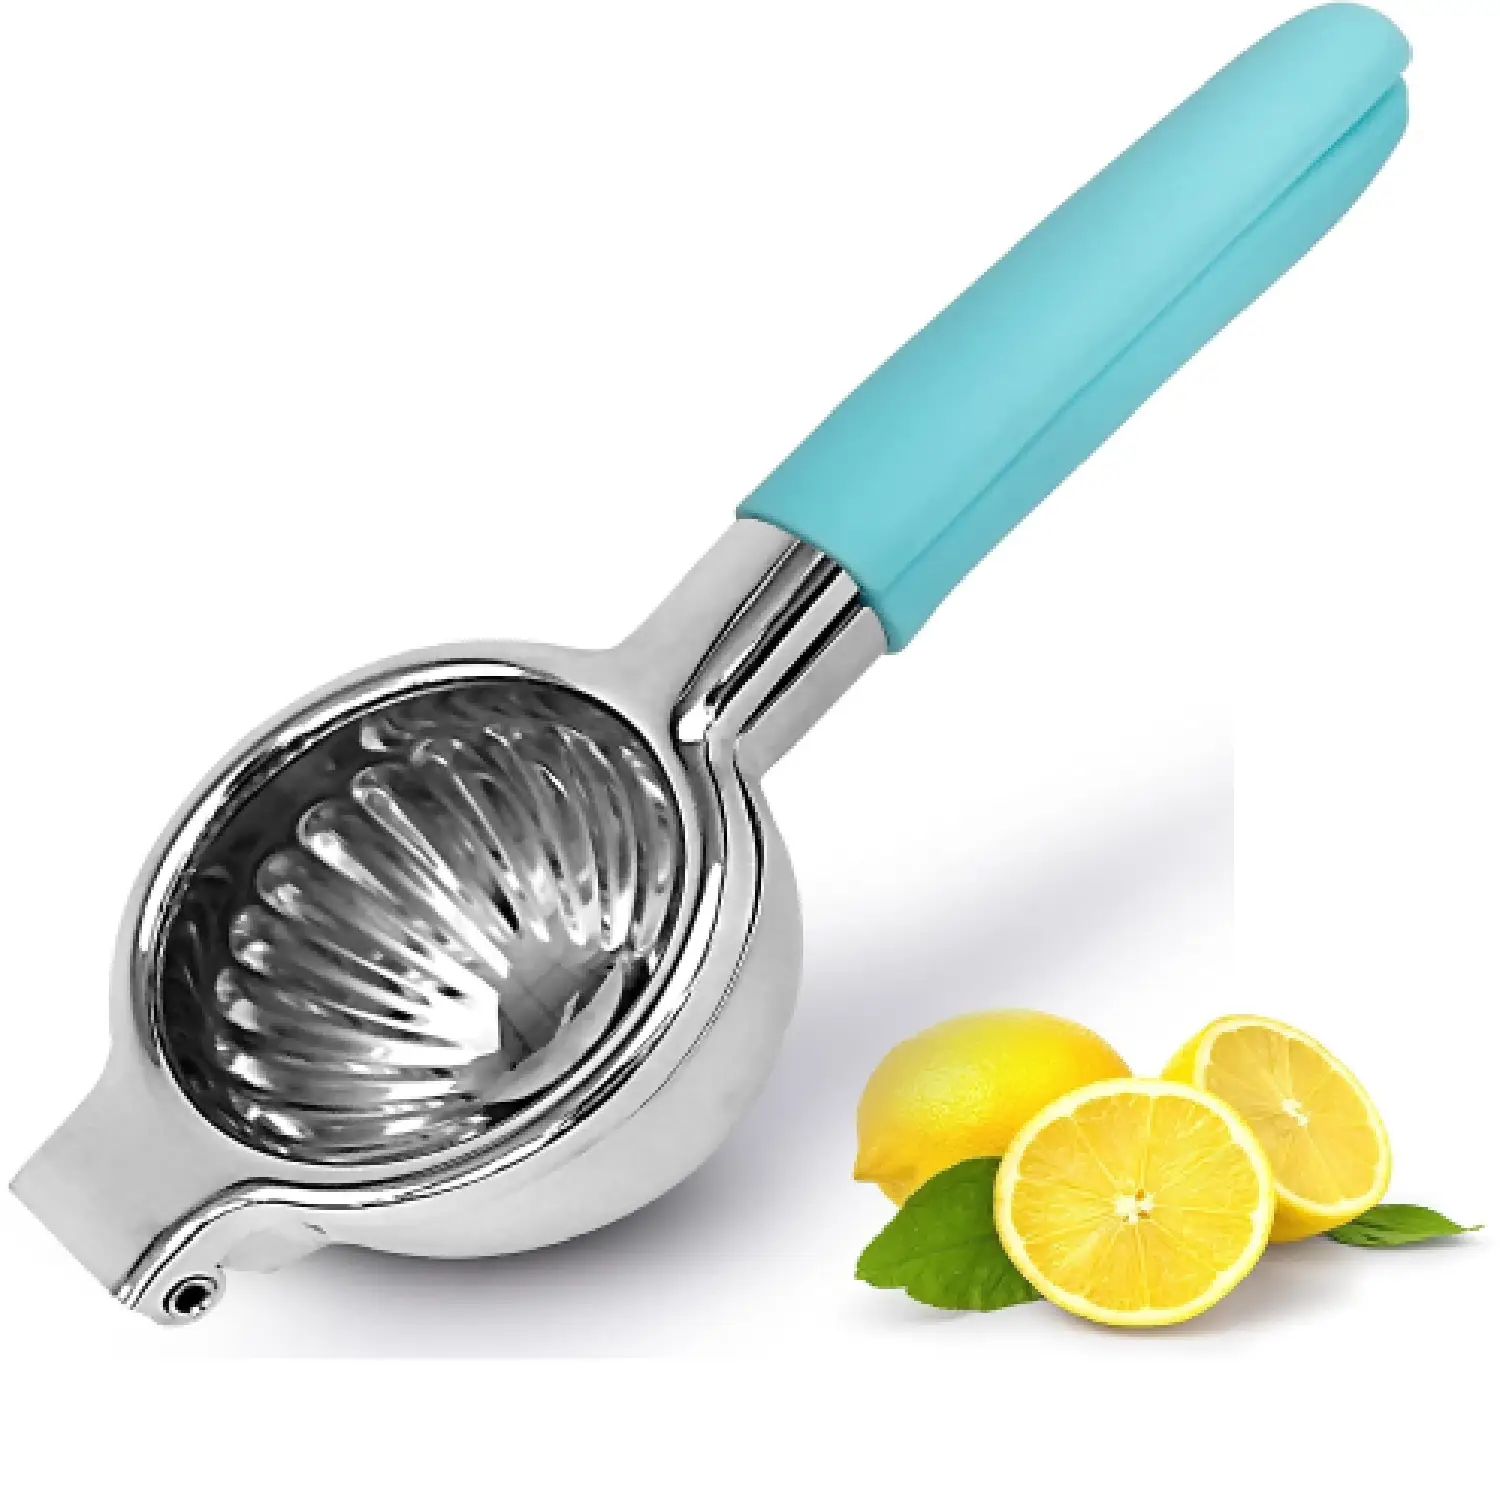 Zulay Stainless Steel Lemon Squeezer With Premium Solid Metal Squeezer Bowl And Food Grade Silicone 